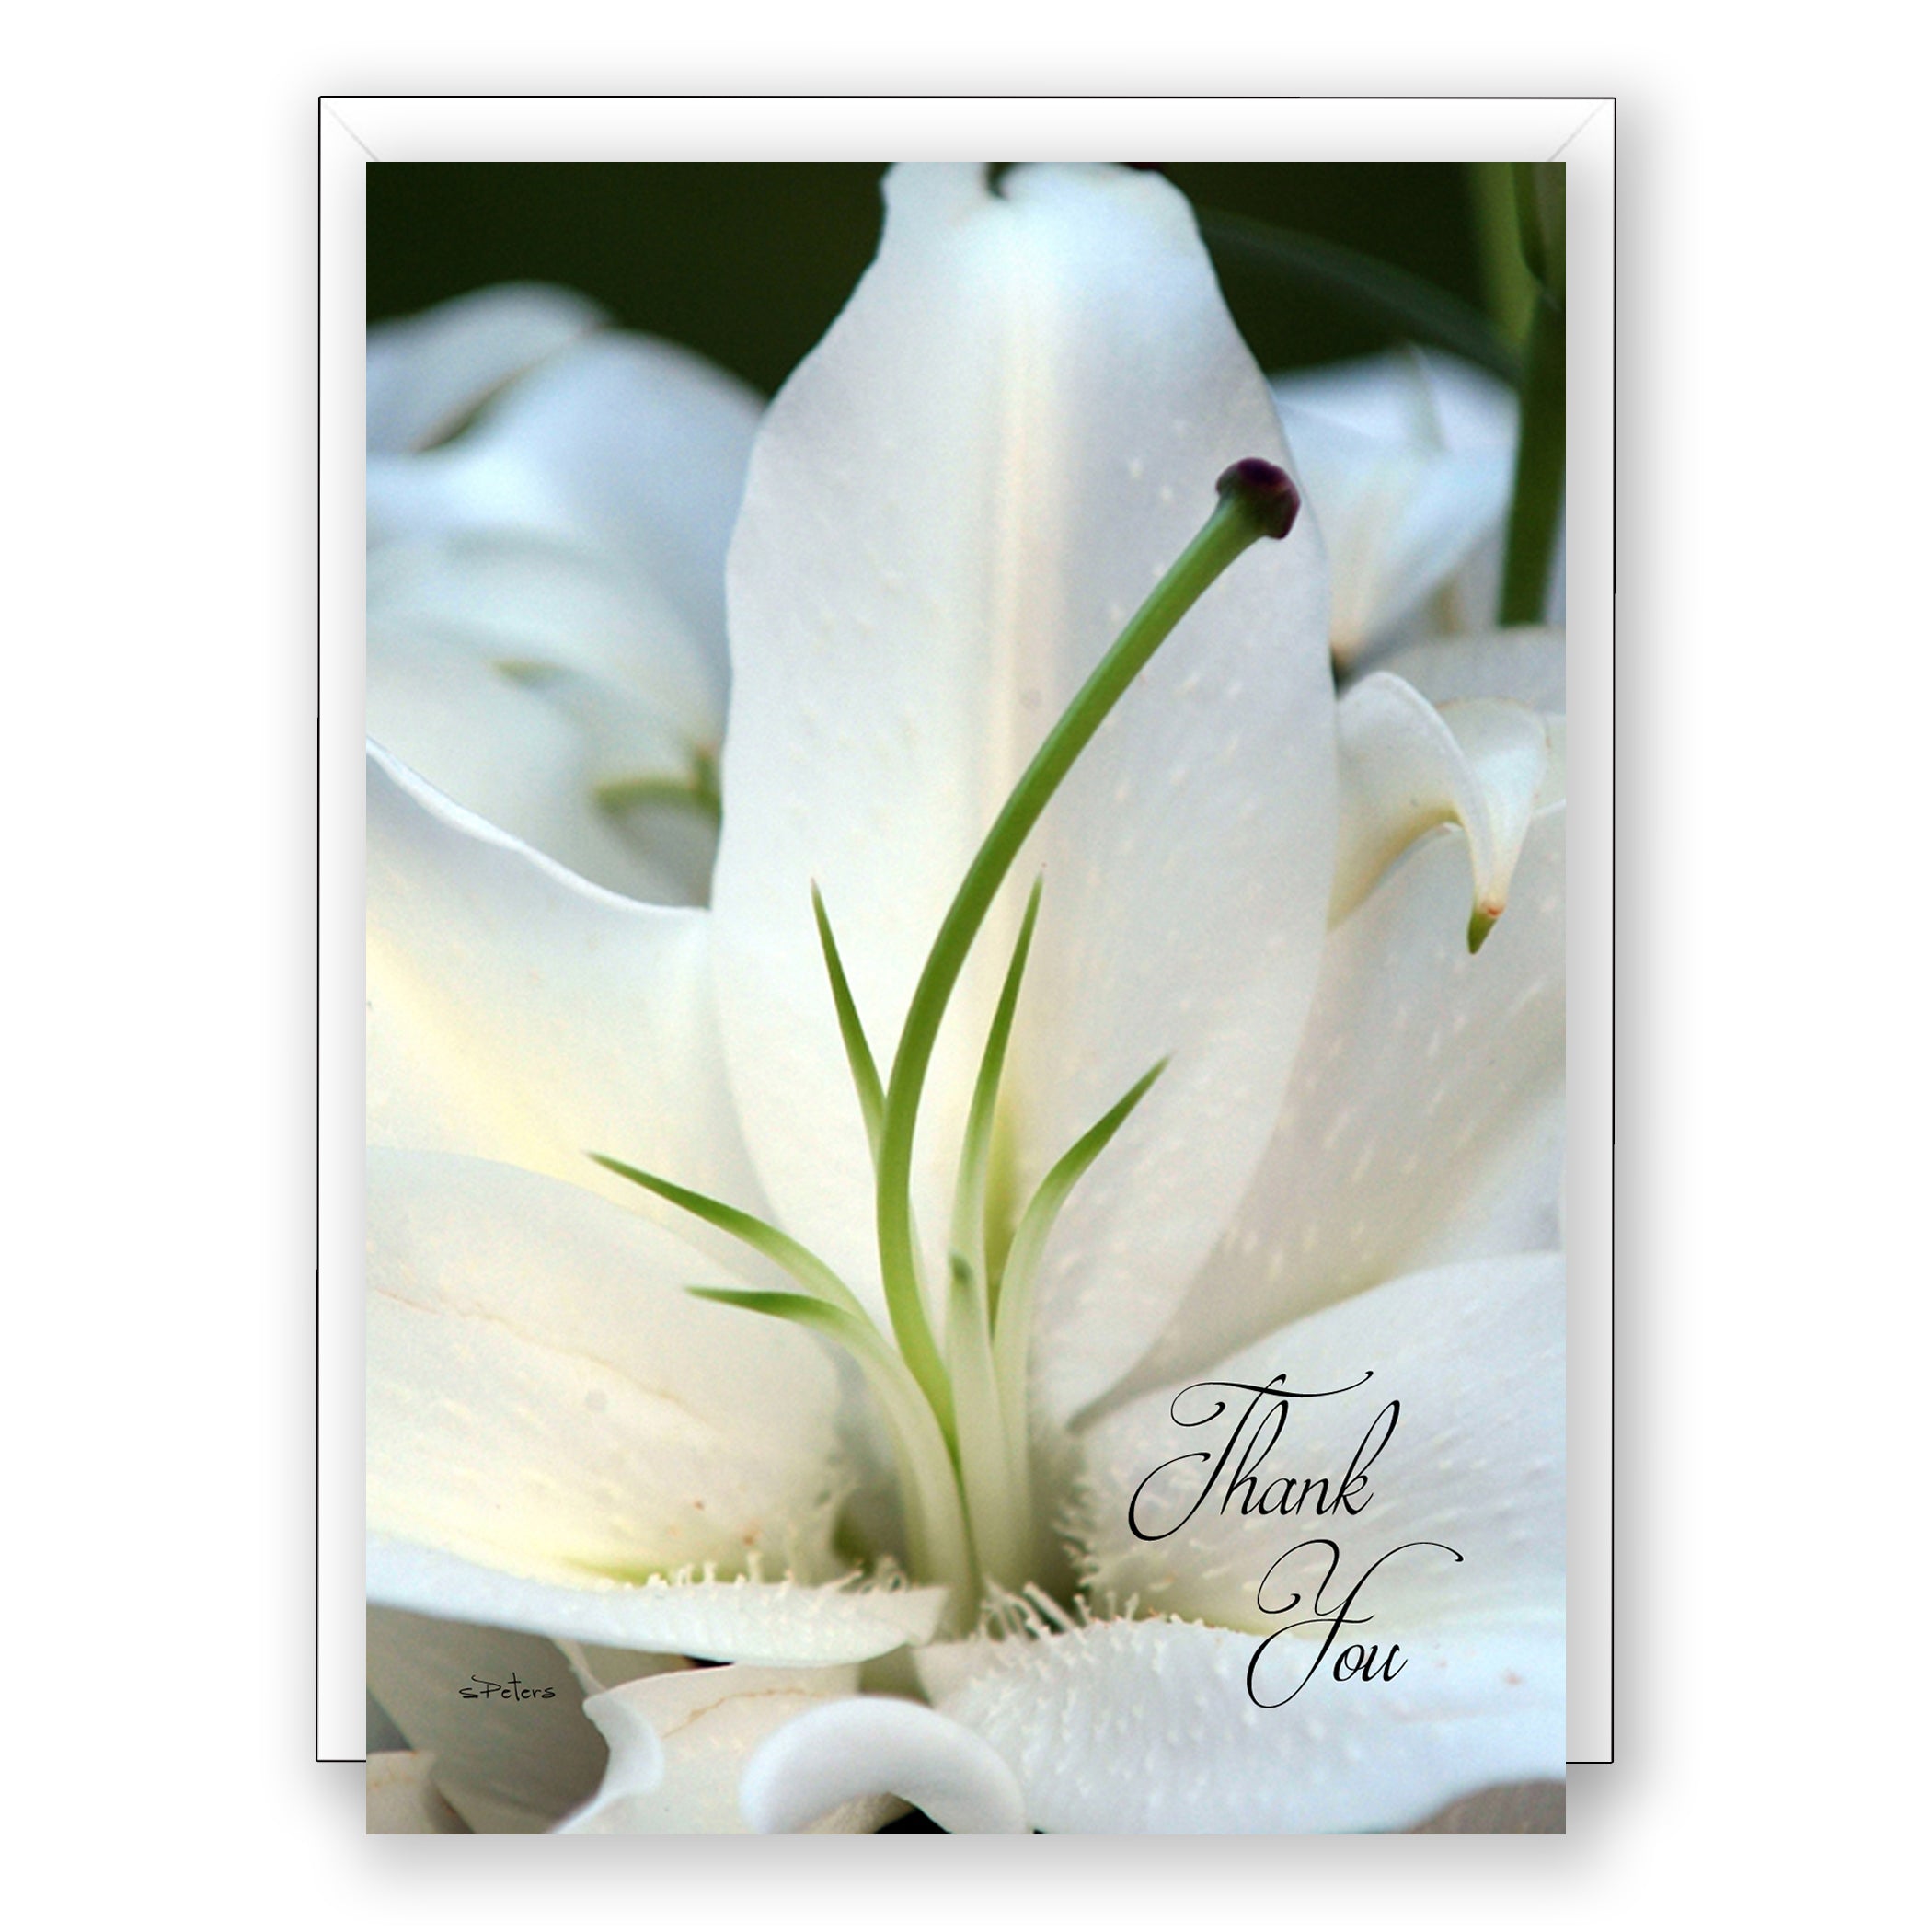 Linda's Lily - Thank You Card